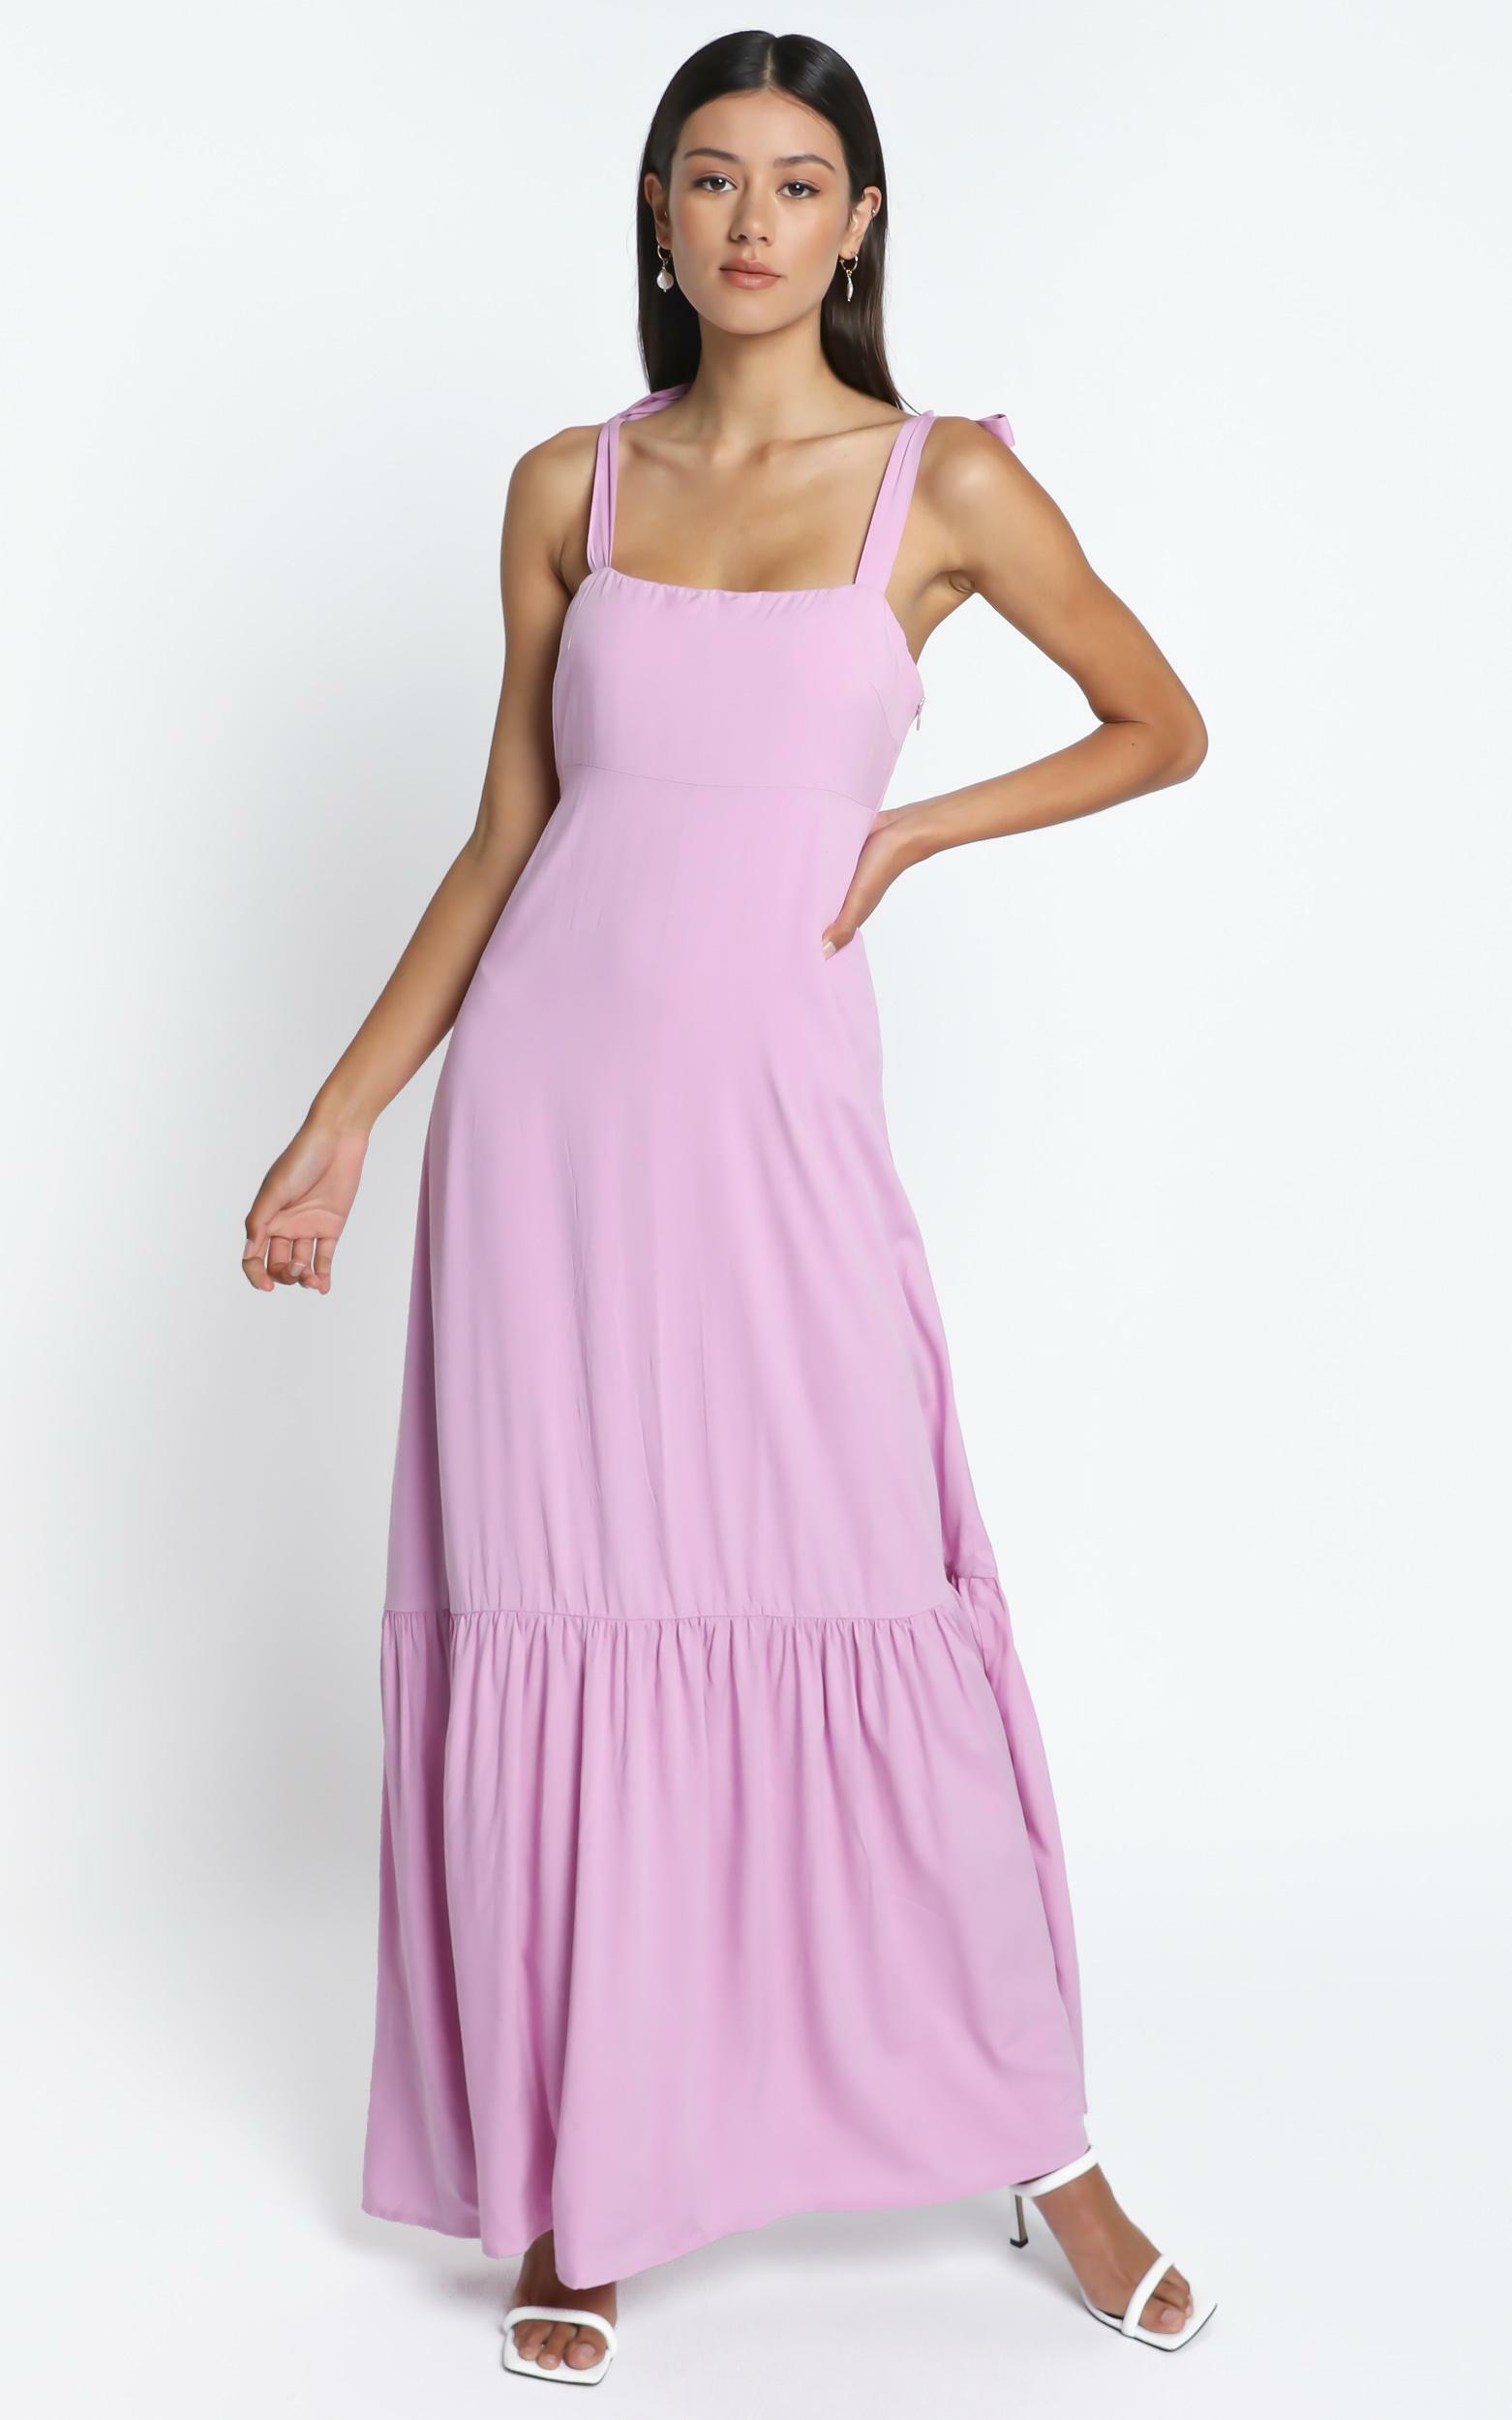 Honor Dress in Lilac - 6 (XS), Purple, hi-res image number null